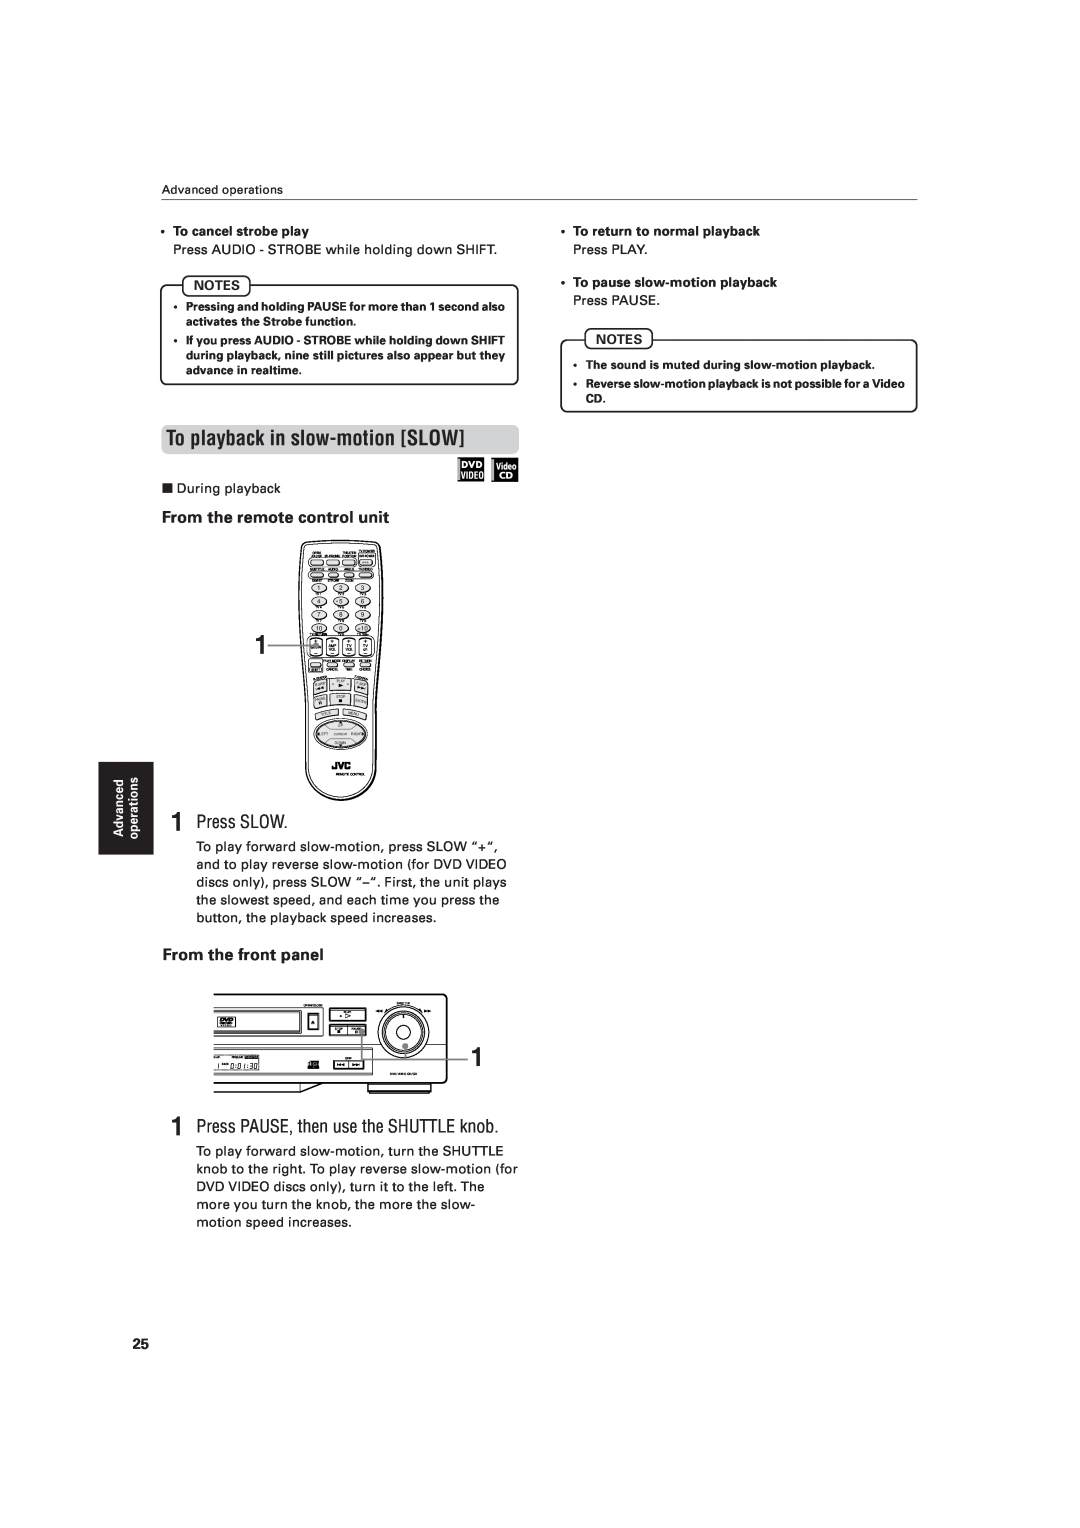 JVC XV-521BK manual To playback in slow-motion SLOW, Press SLOW, Press PAUSE, then use the SHUTTLE knob 